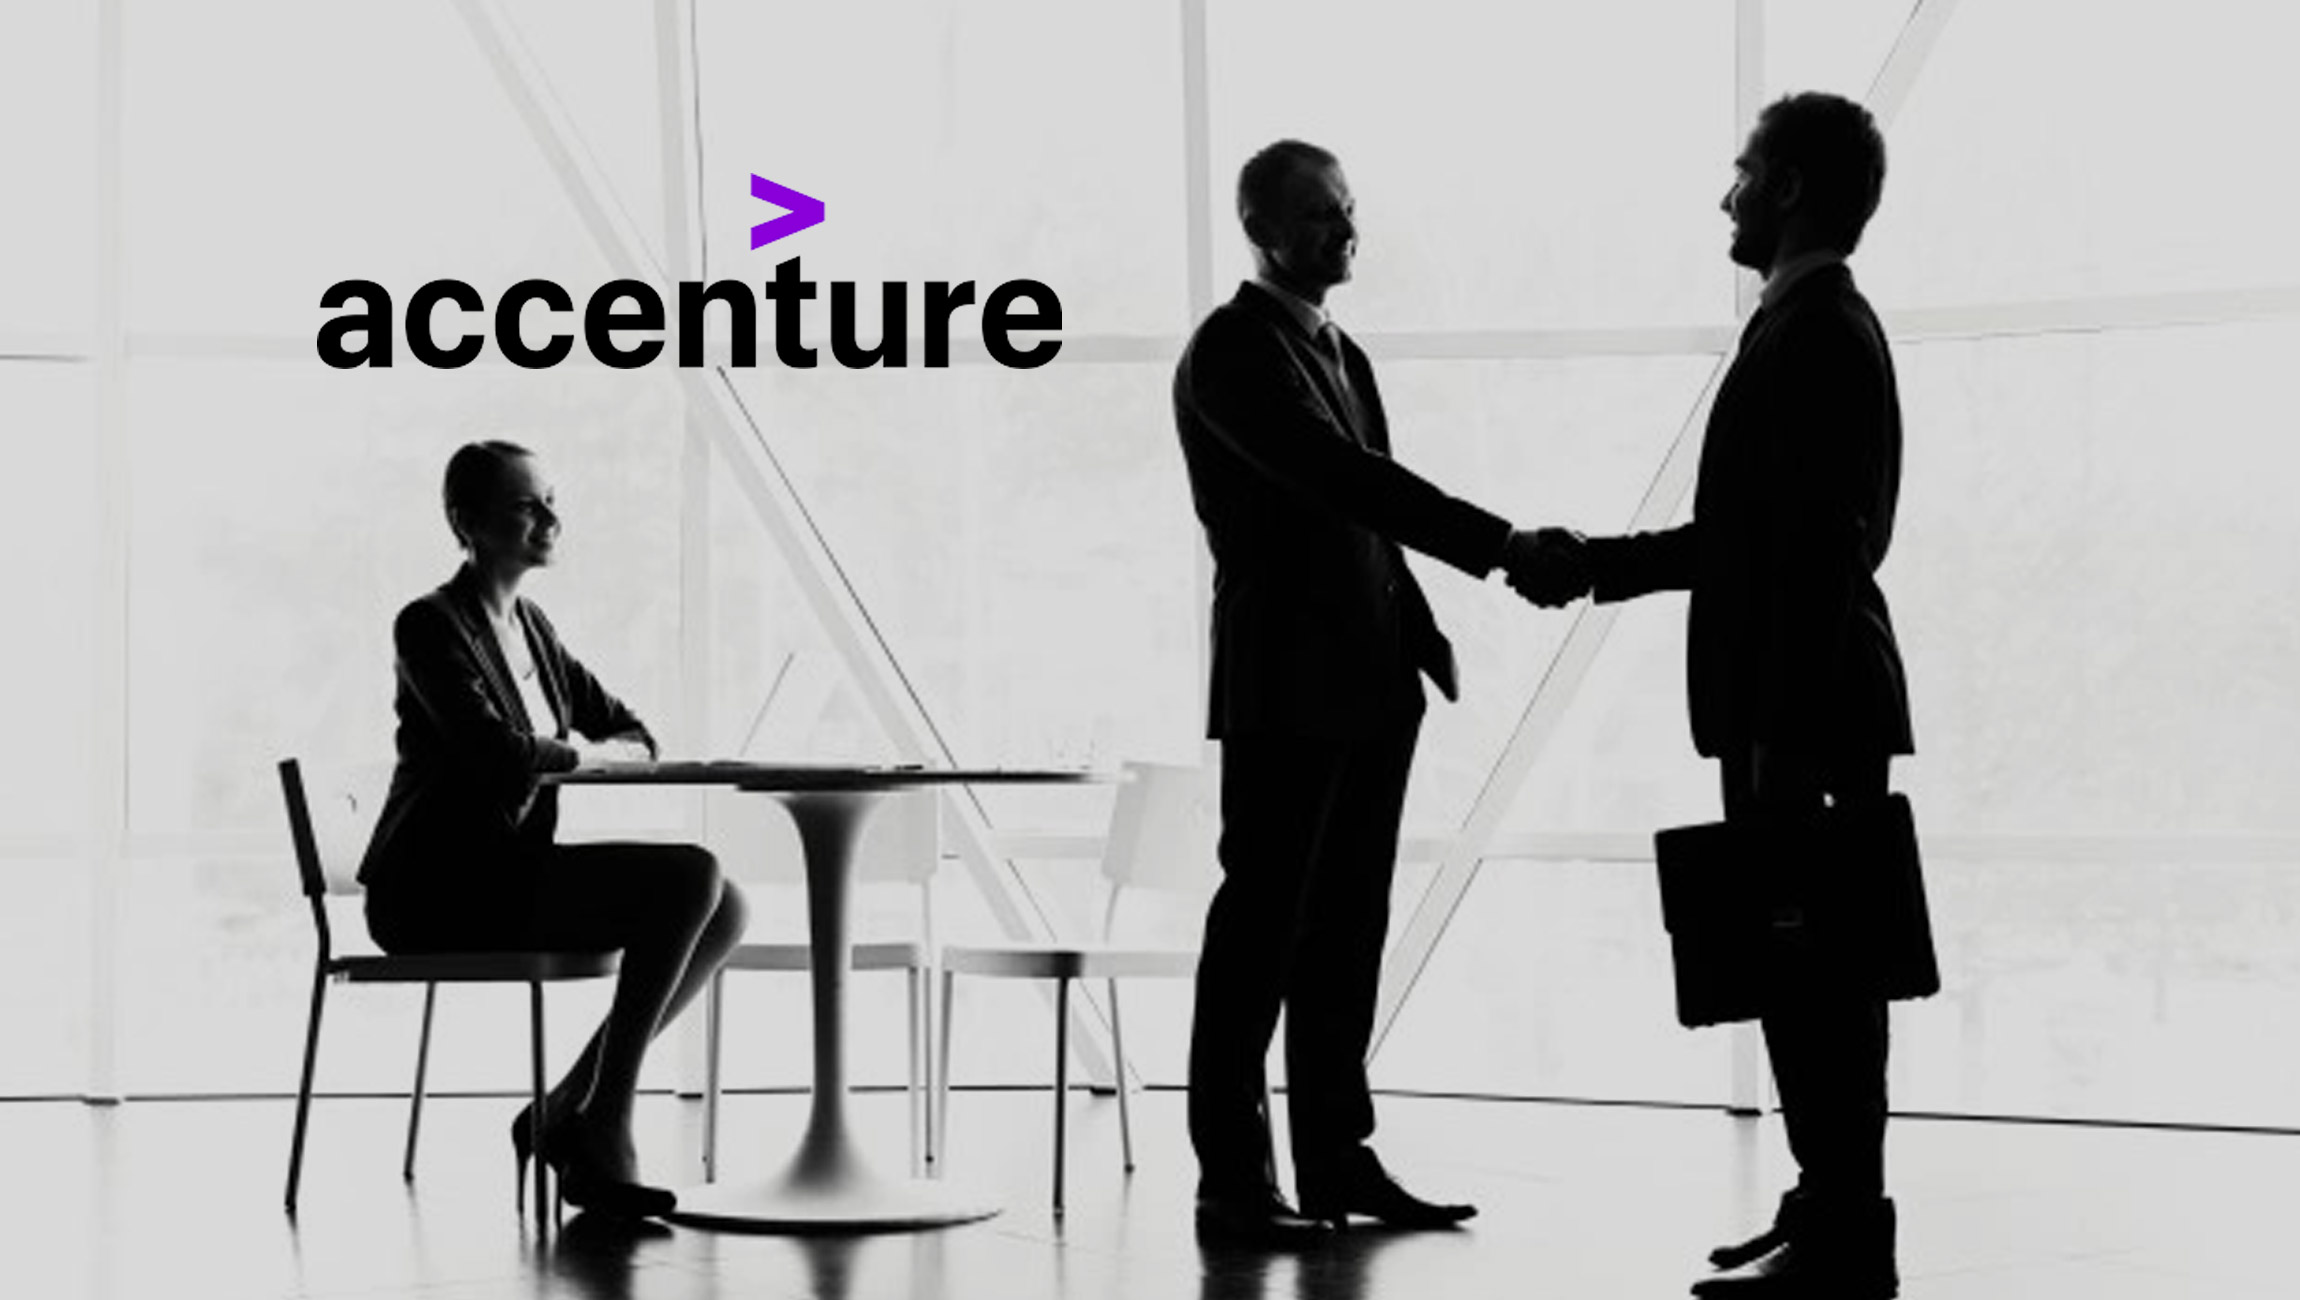 Accenture and Atlassian Form Strategic Partnership to Help Organizations Achieve Greater Enterprise Agility